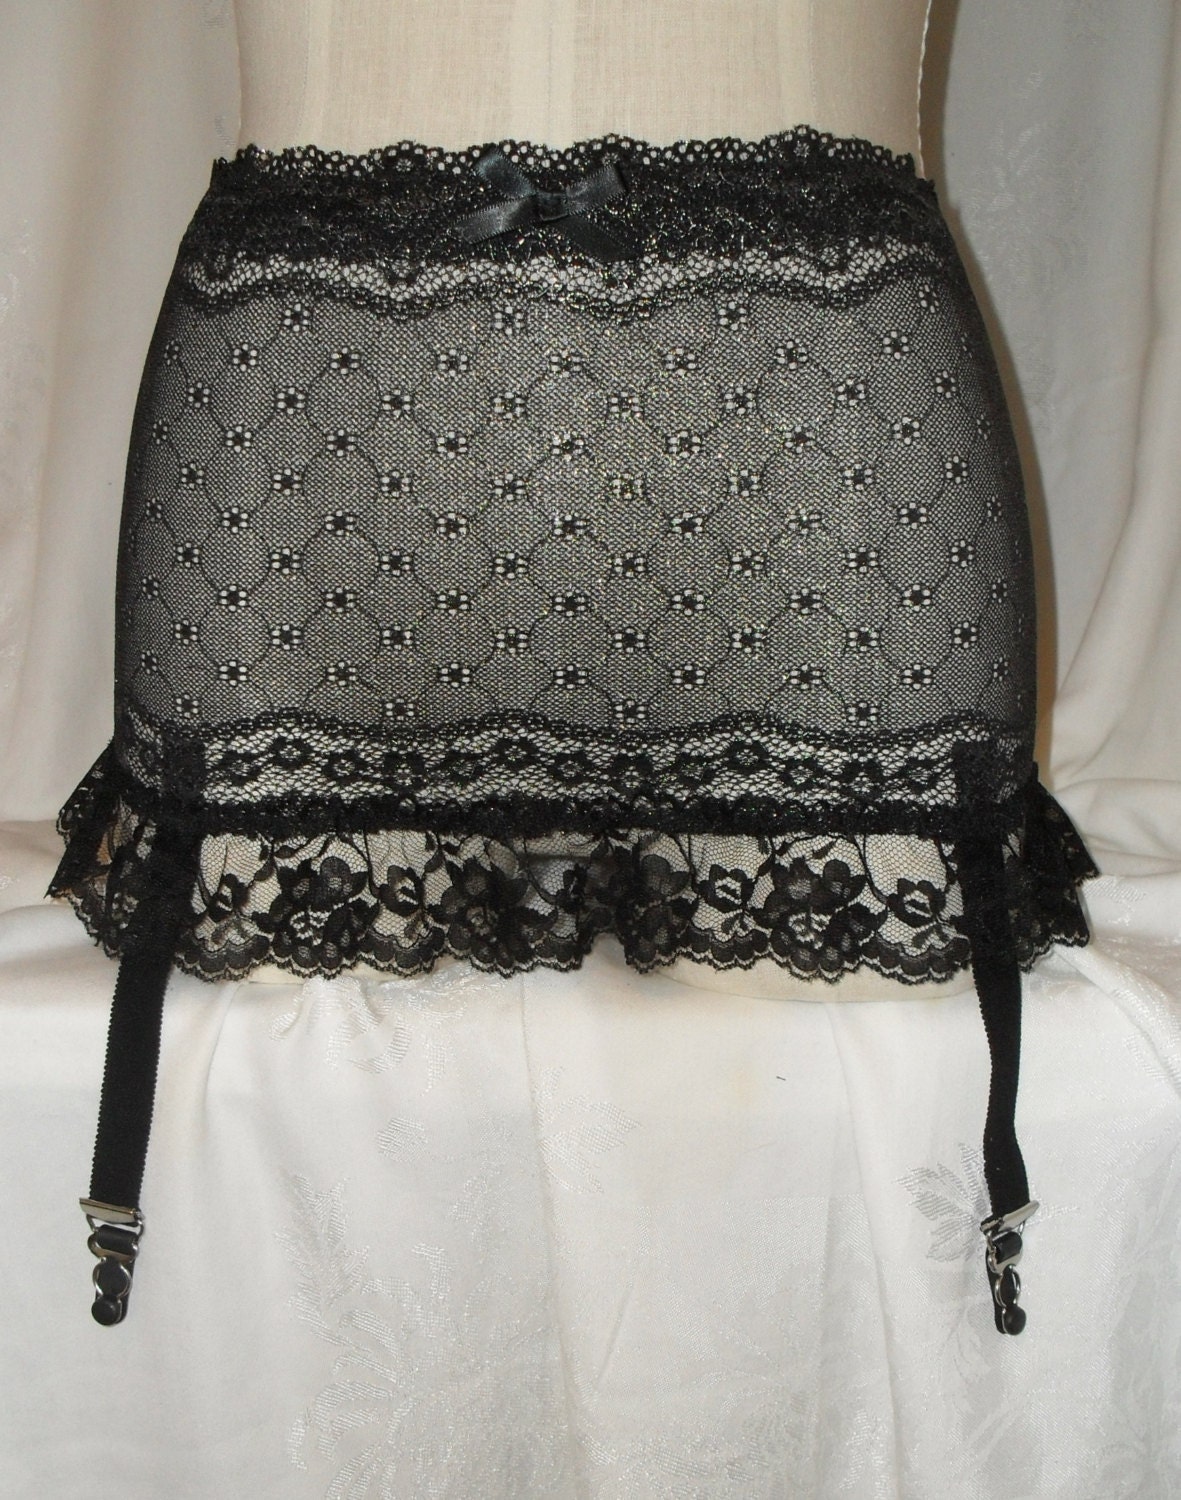 Garter Belt Retro Style in Black Stetch Lace with Silver